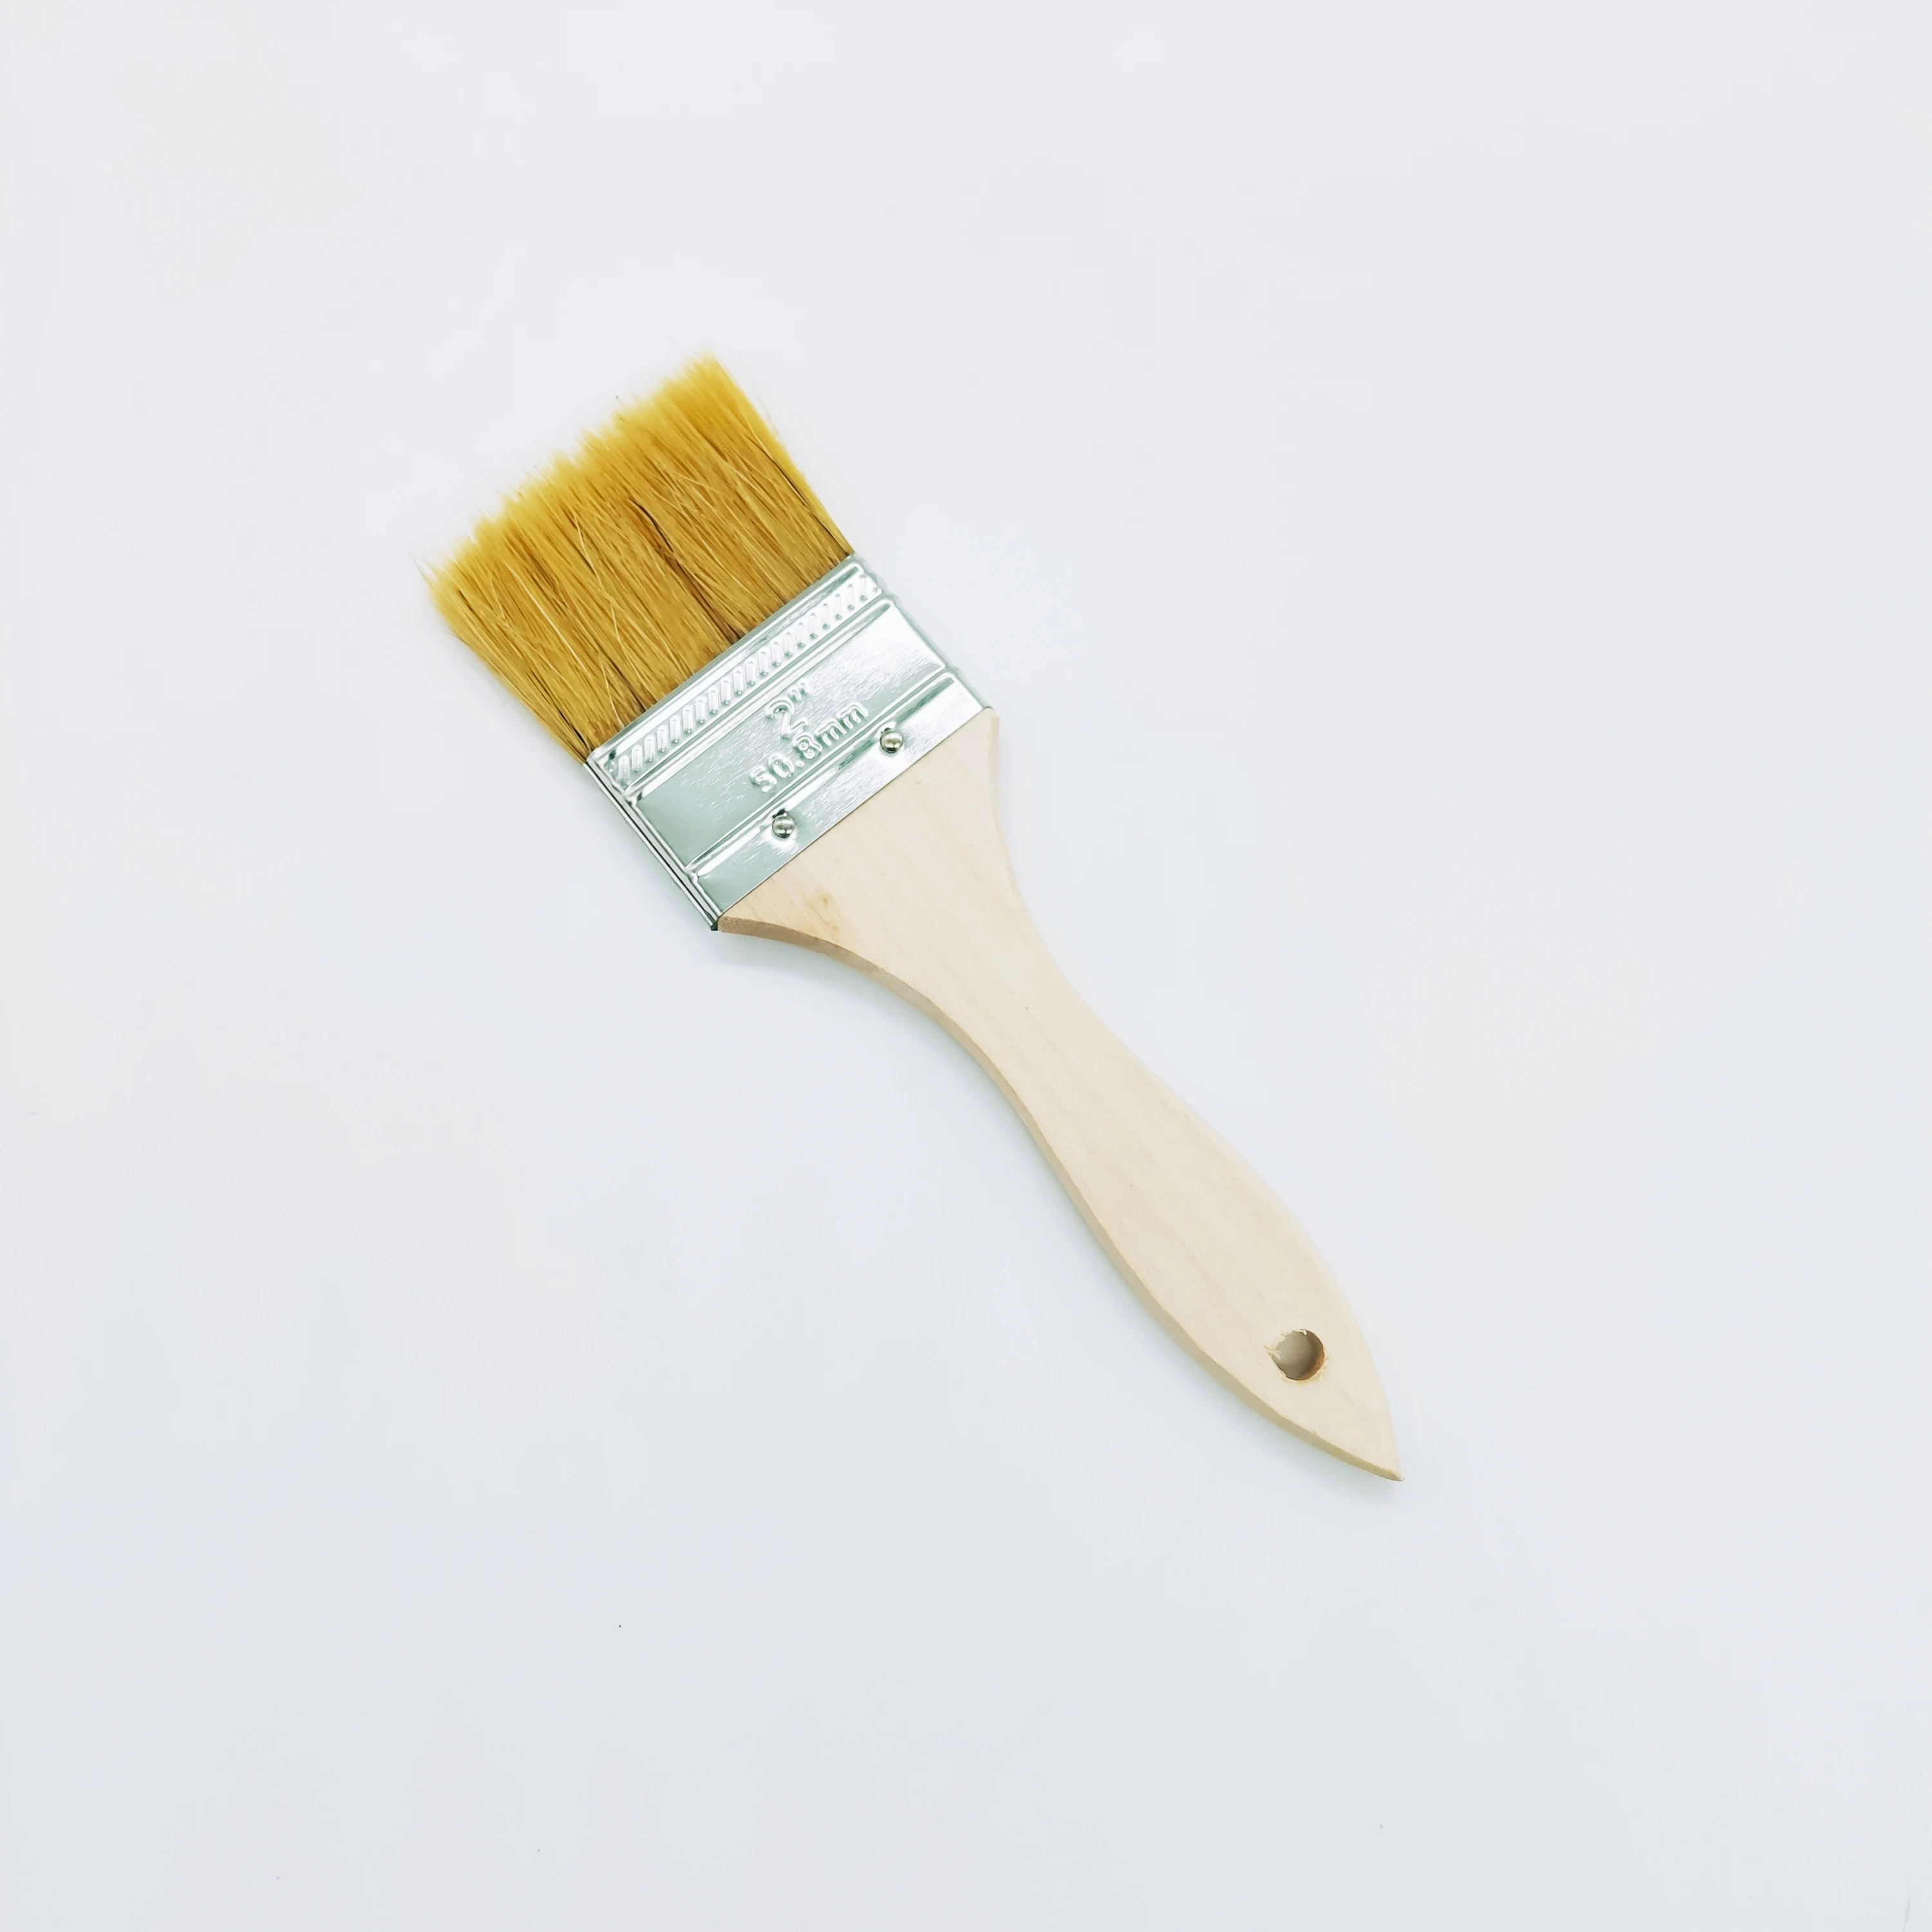 Excellent quality 100% natural bristle chip paint brush with thin wooden handle